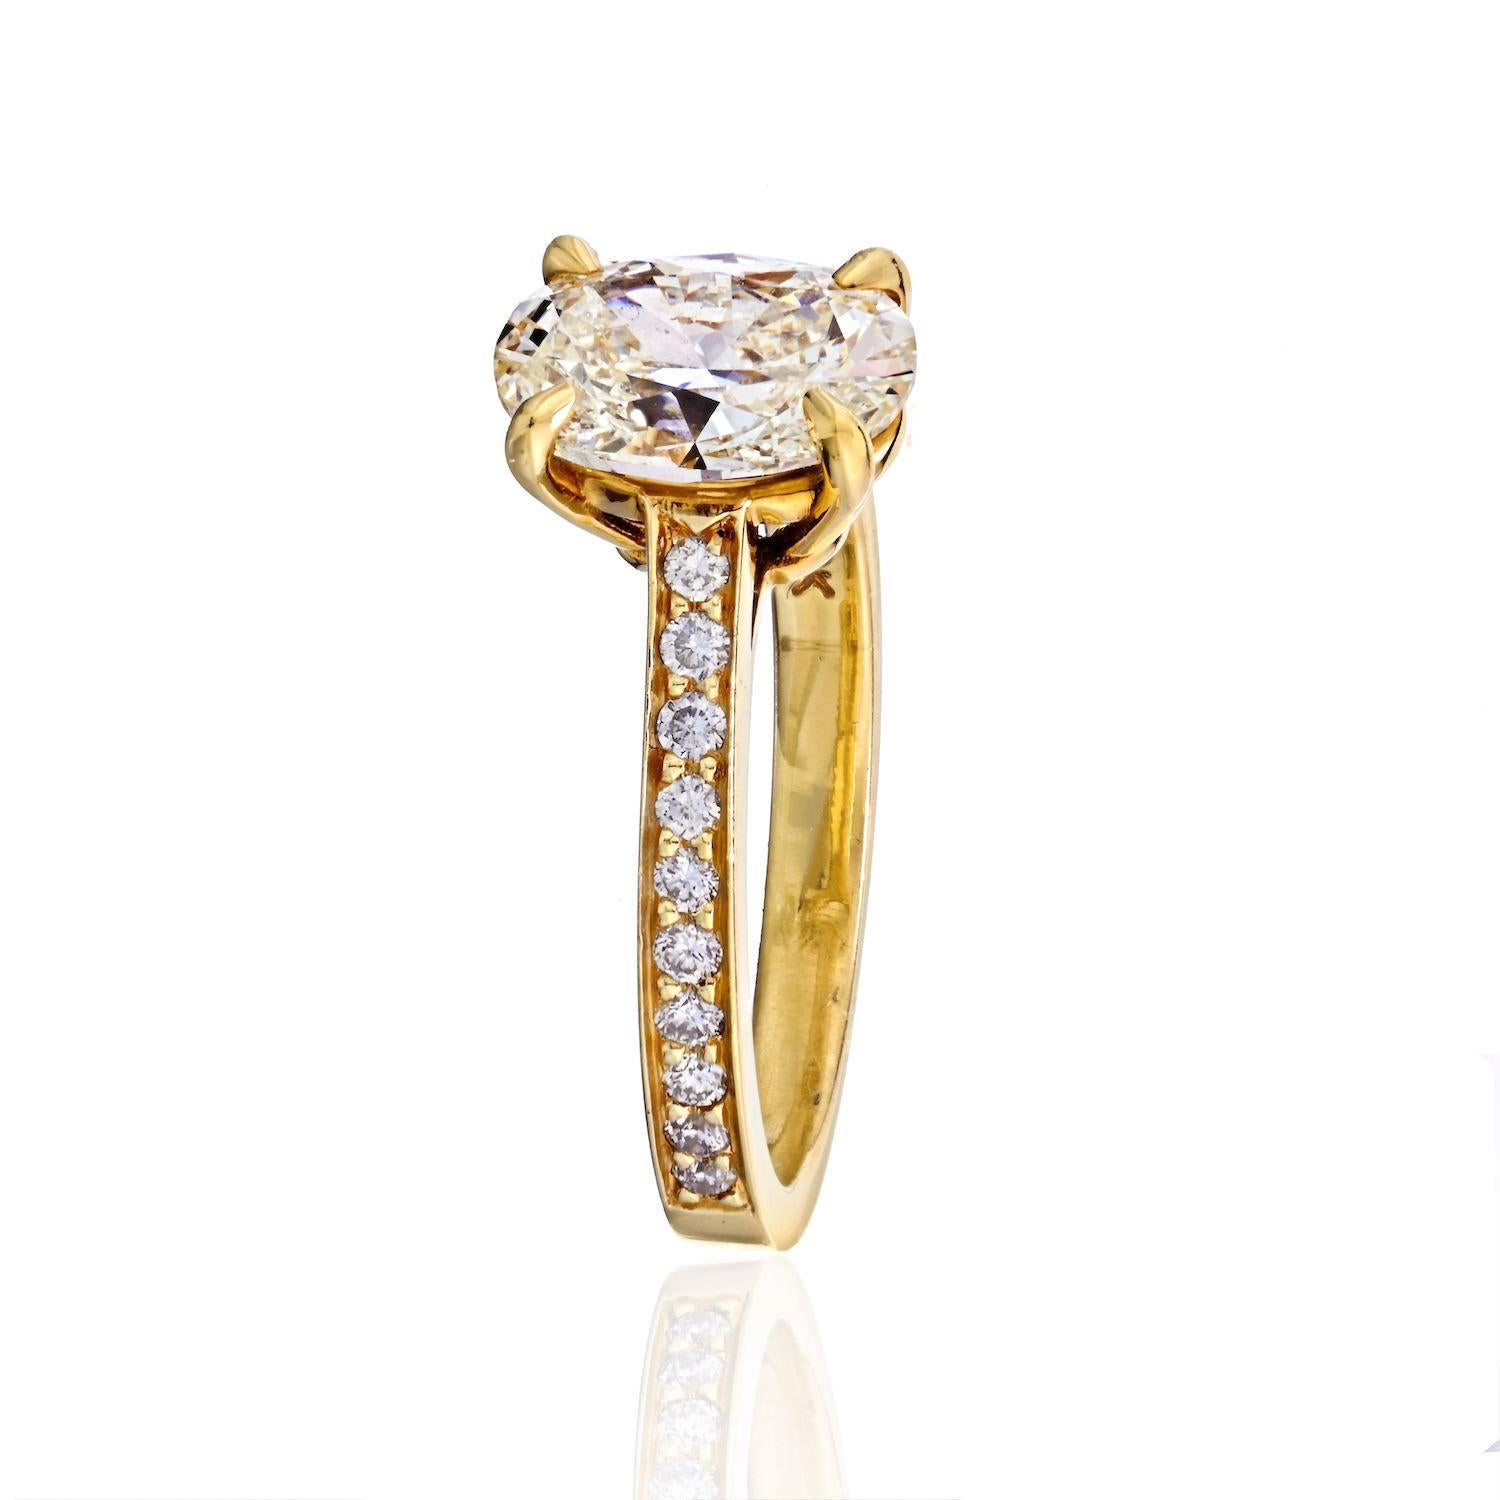 This oval cut diamond solitaire is set in a handmade four-prong 18K Yellow Gold mounting with a diamond pavé band. Our engagement rings are hand-crafted in New York, custom tailored to any desired specification and utilizing GIA-certified diamonds.